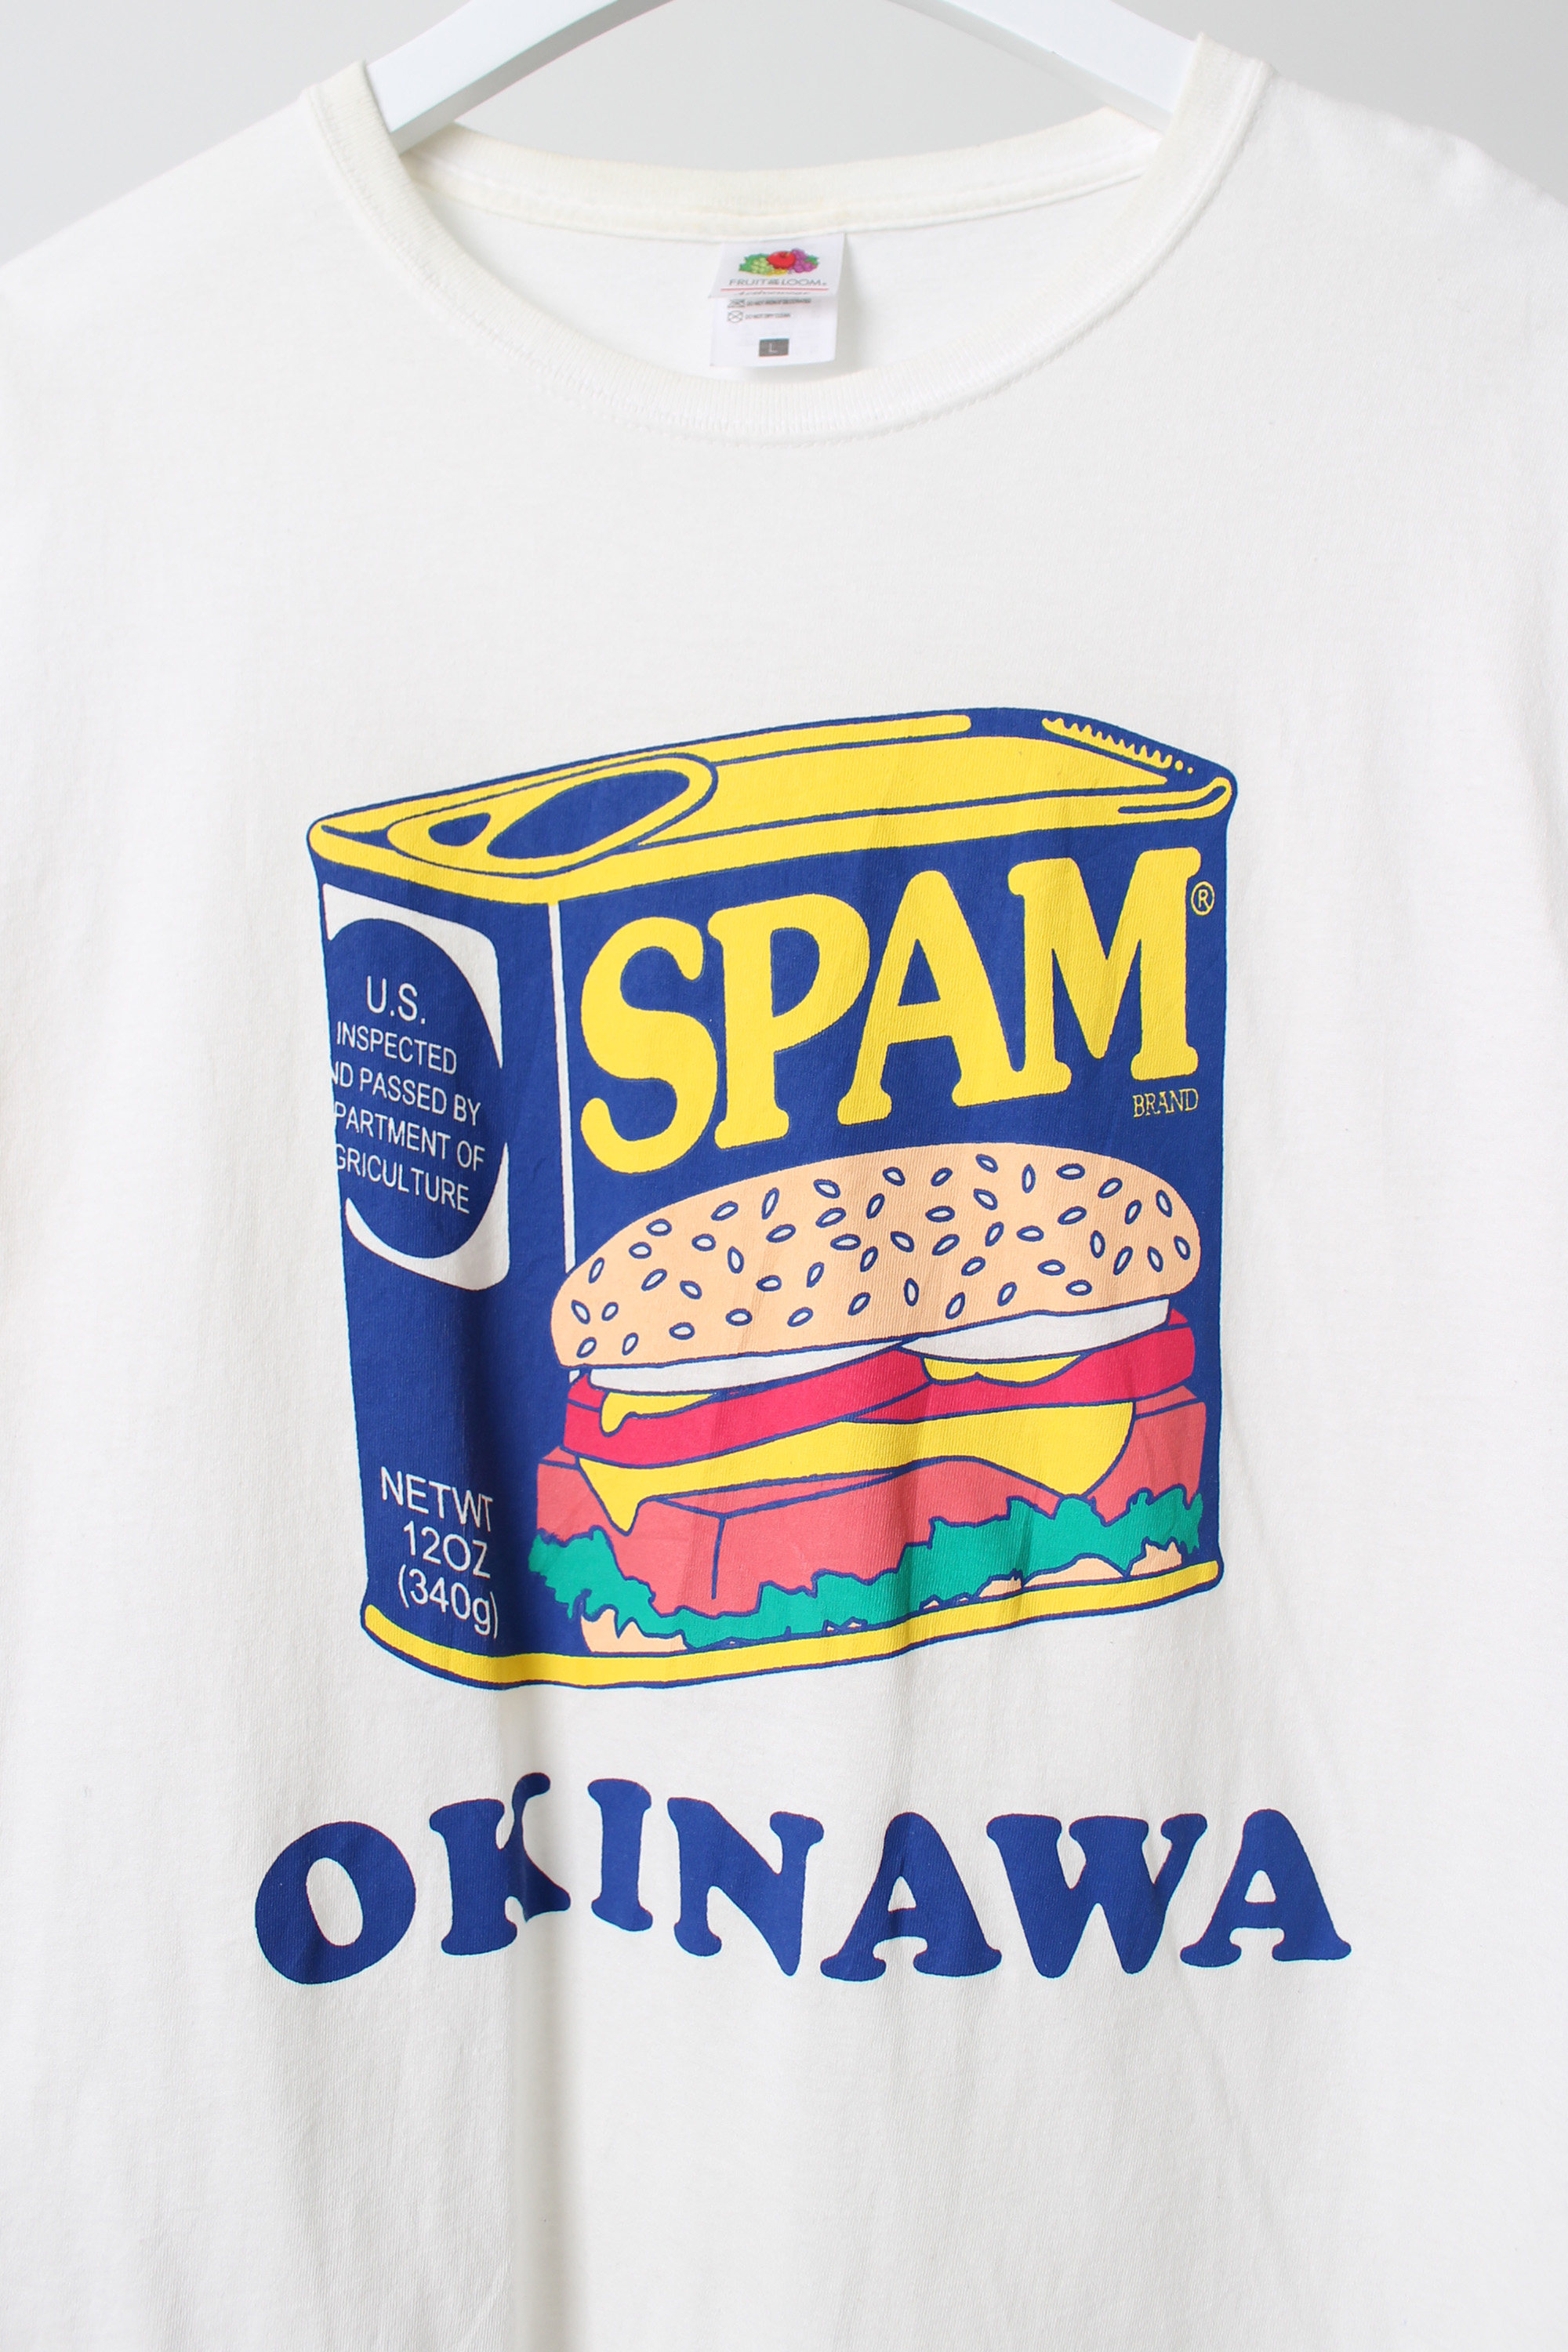 Fruit of the Loom &quot;SPAM&quot; t-shirt